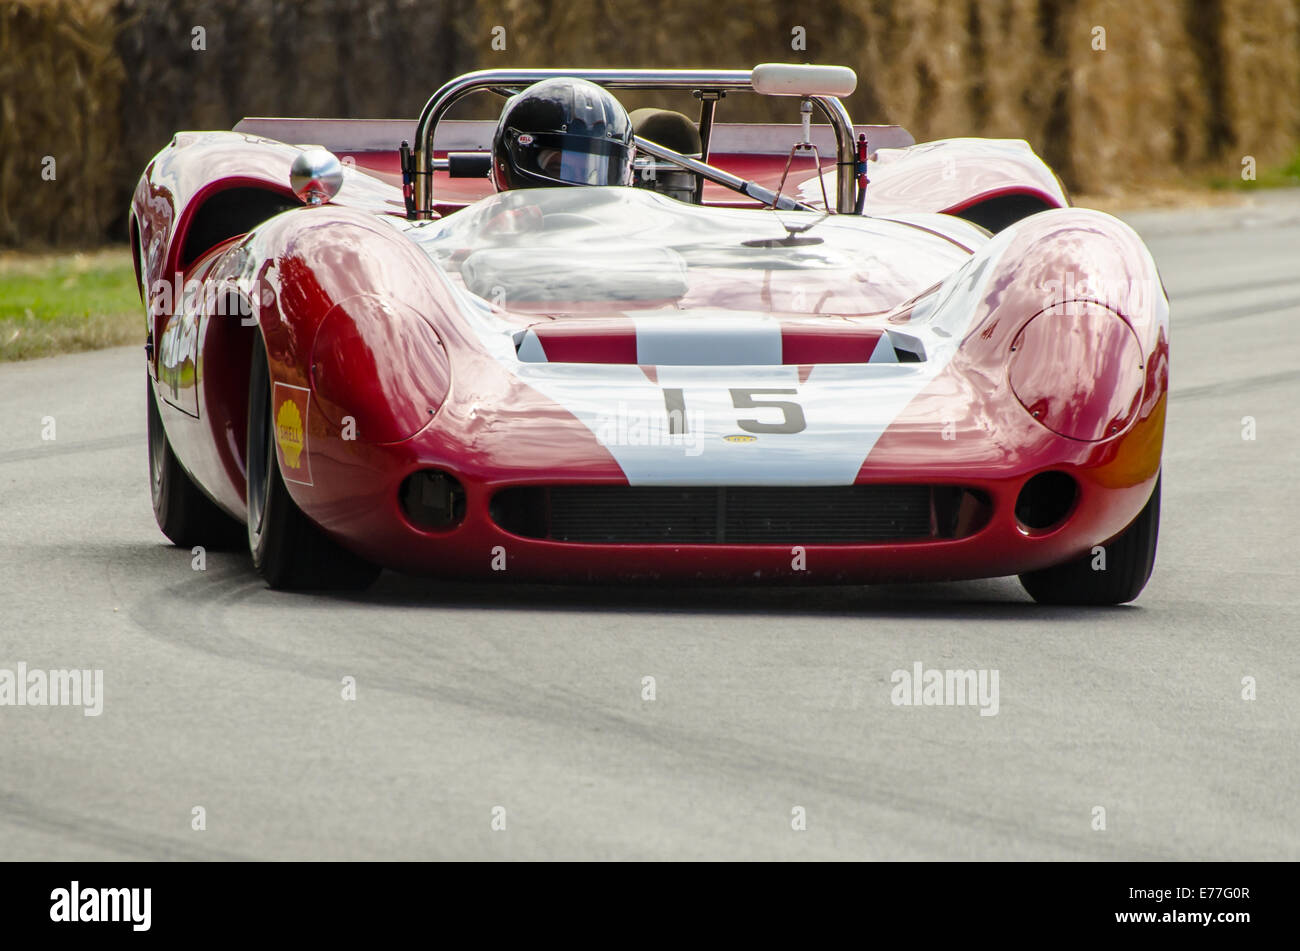 The Lola T70 was built for sports car racing, popular in the mid to late 1960s. Developed by Lola Cars in 1965 in Great Britain. Racing at Goodwood Stock Photo